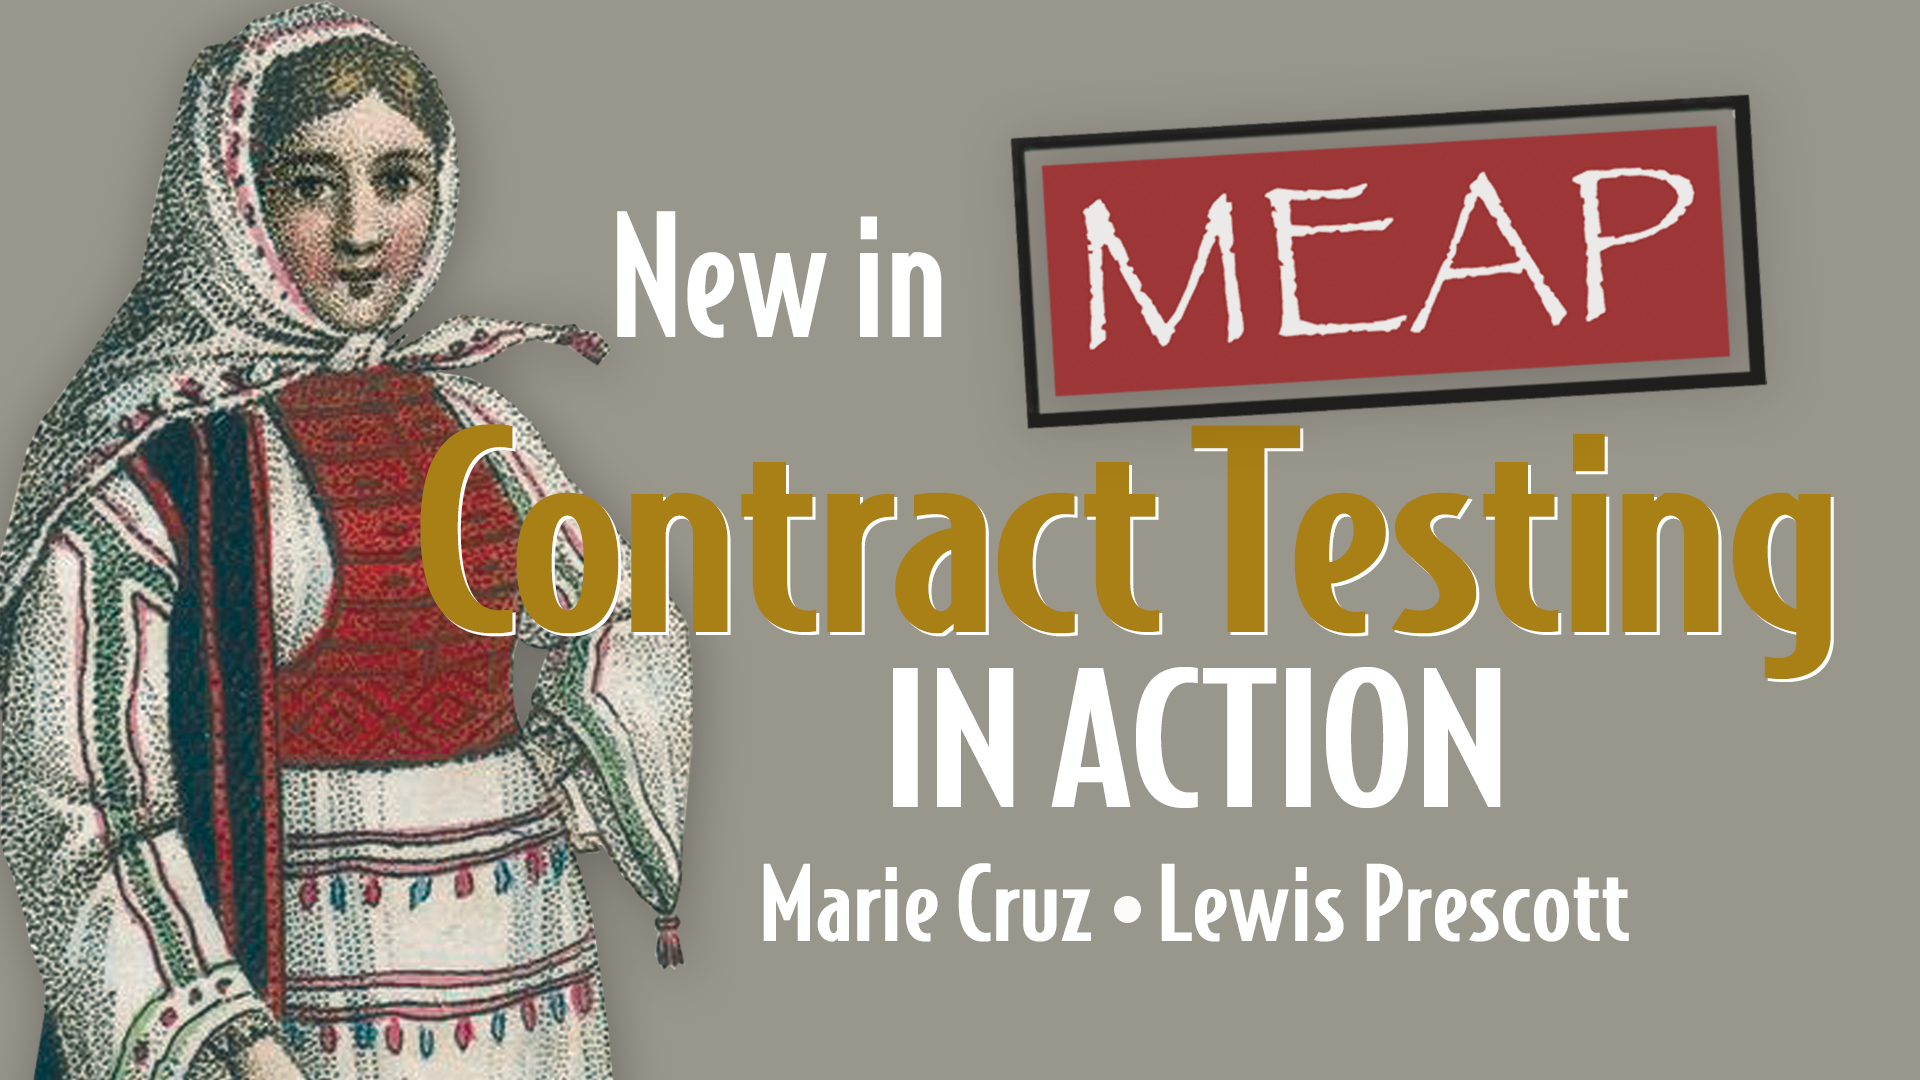 Contract Testing In Action book cover